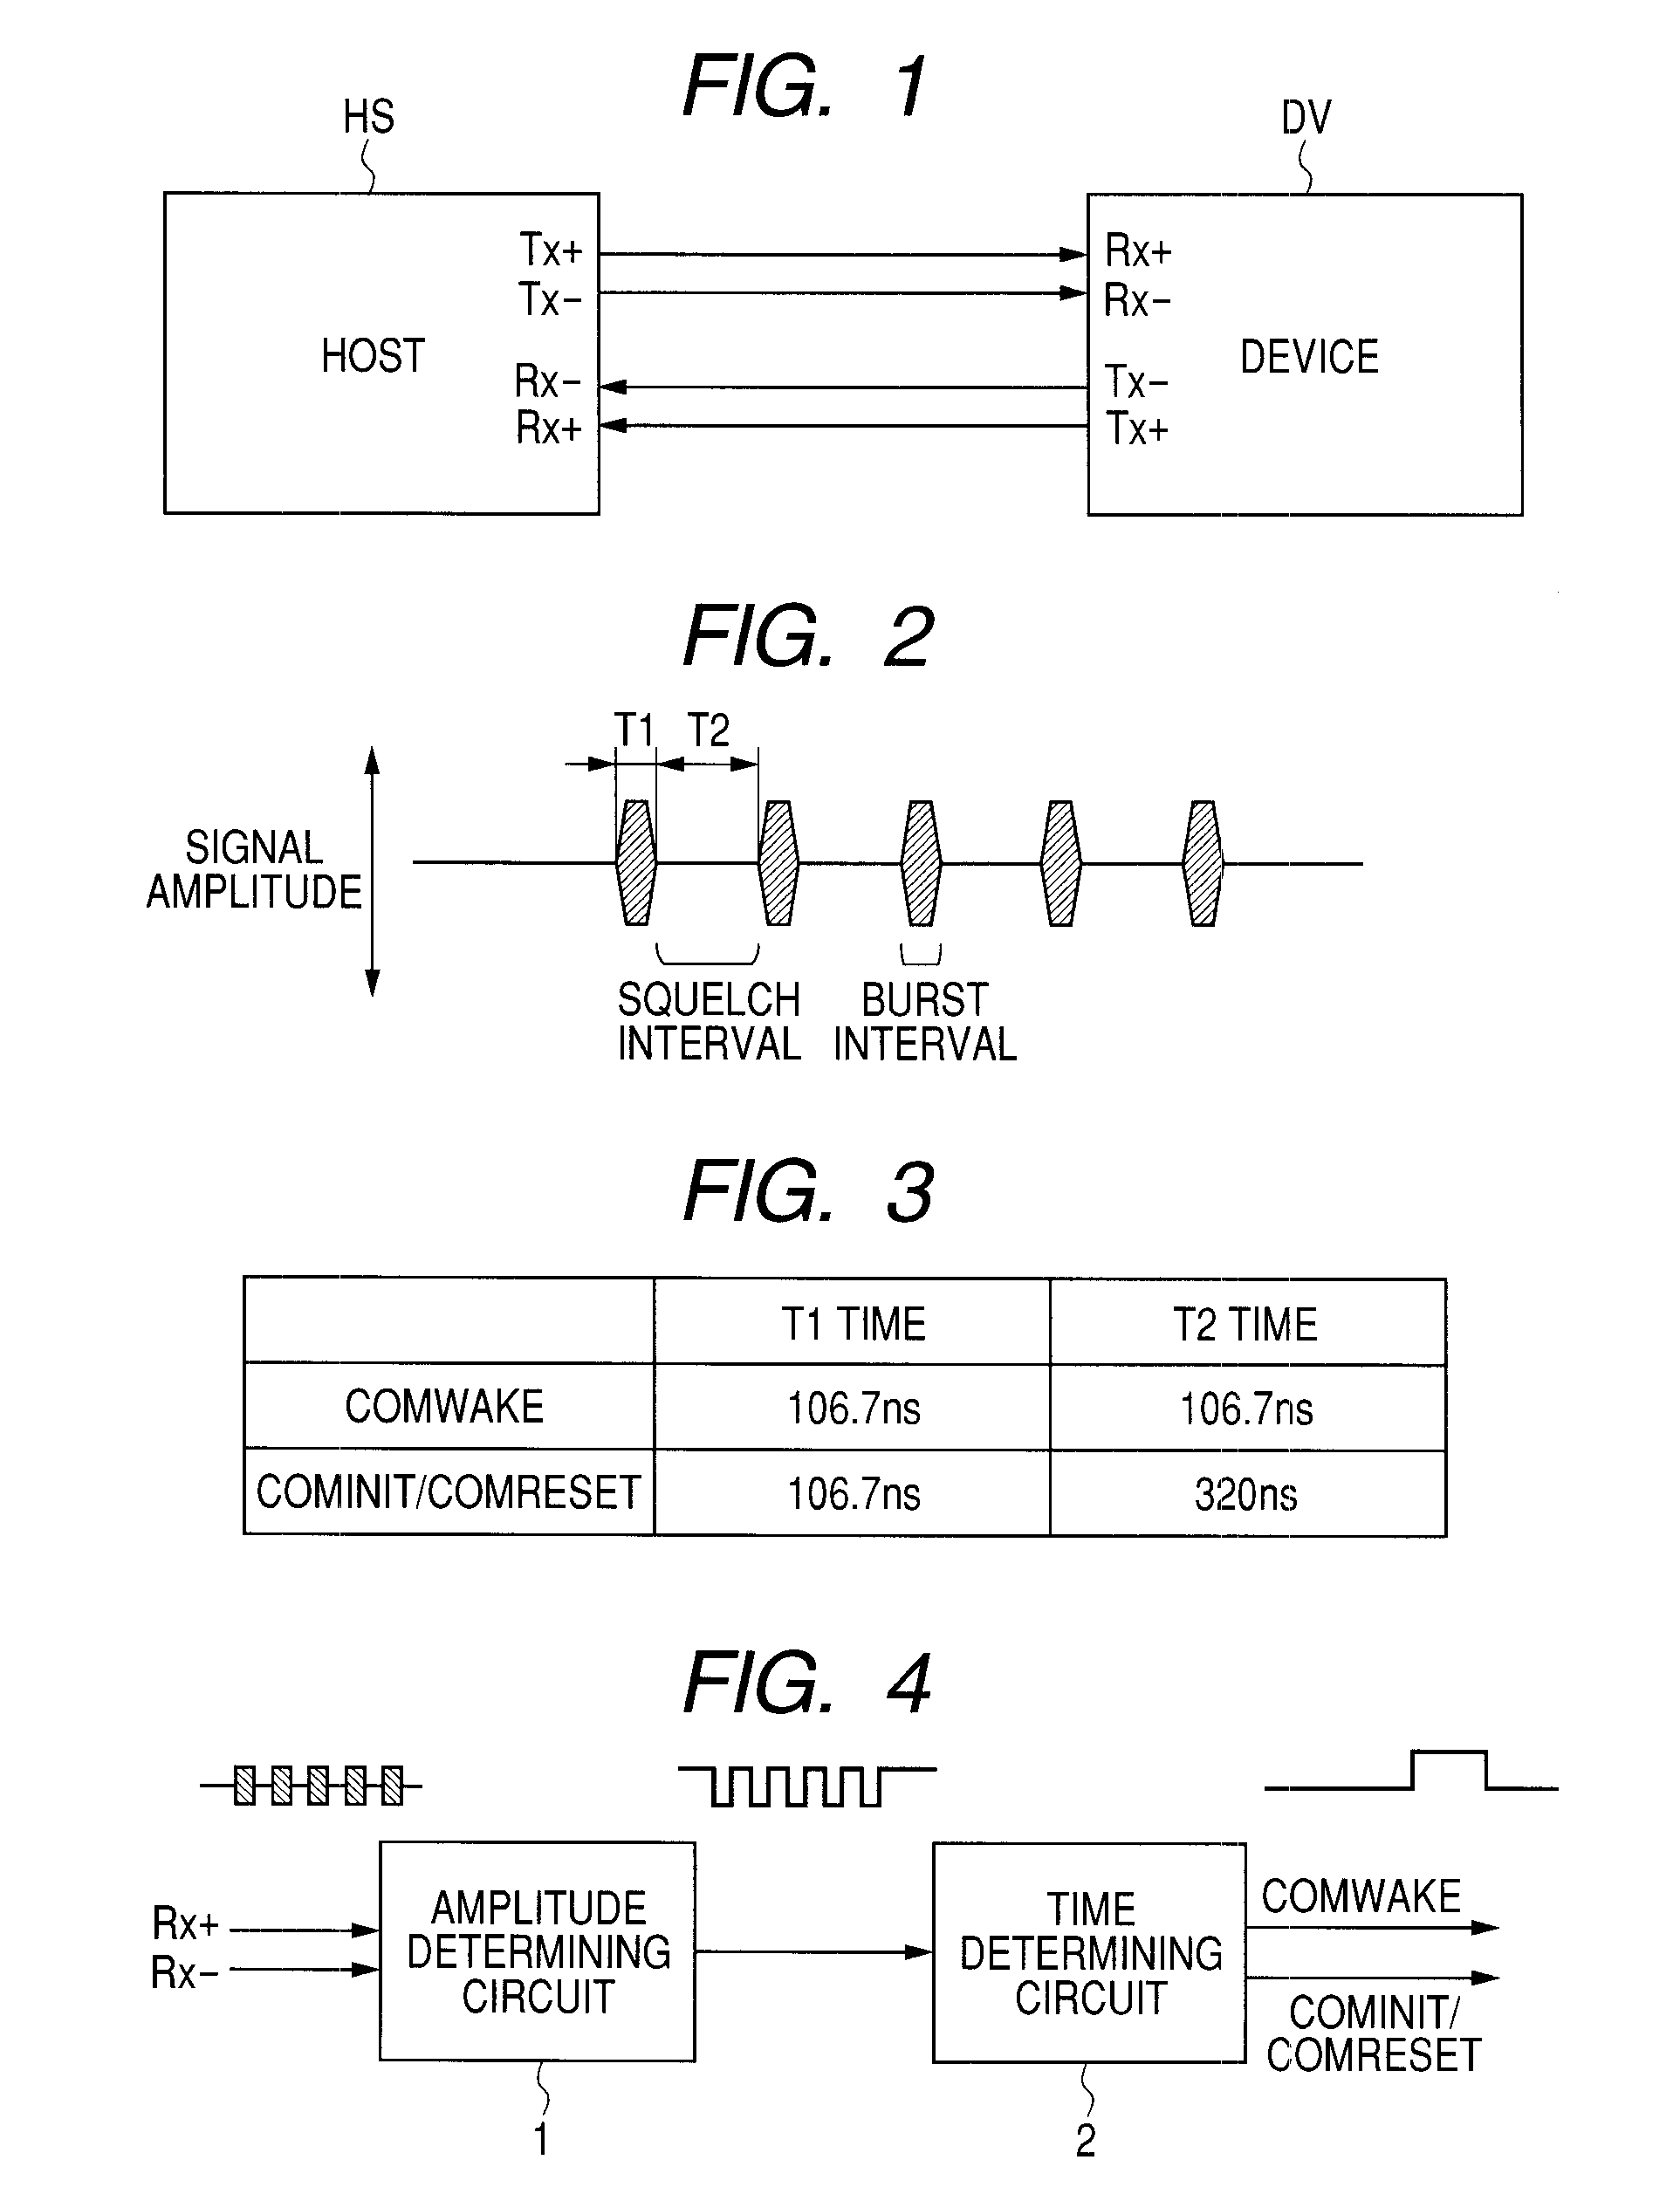 Oob (out of band) detection circuit and serial ata system